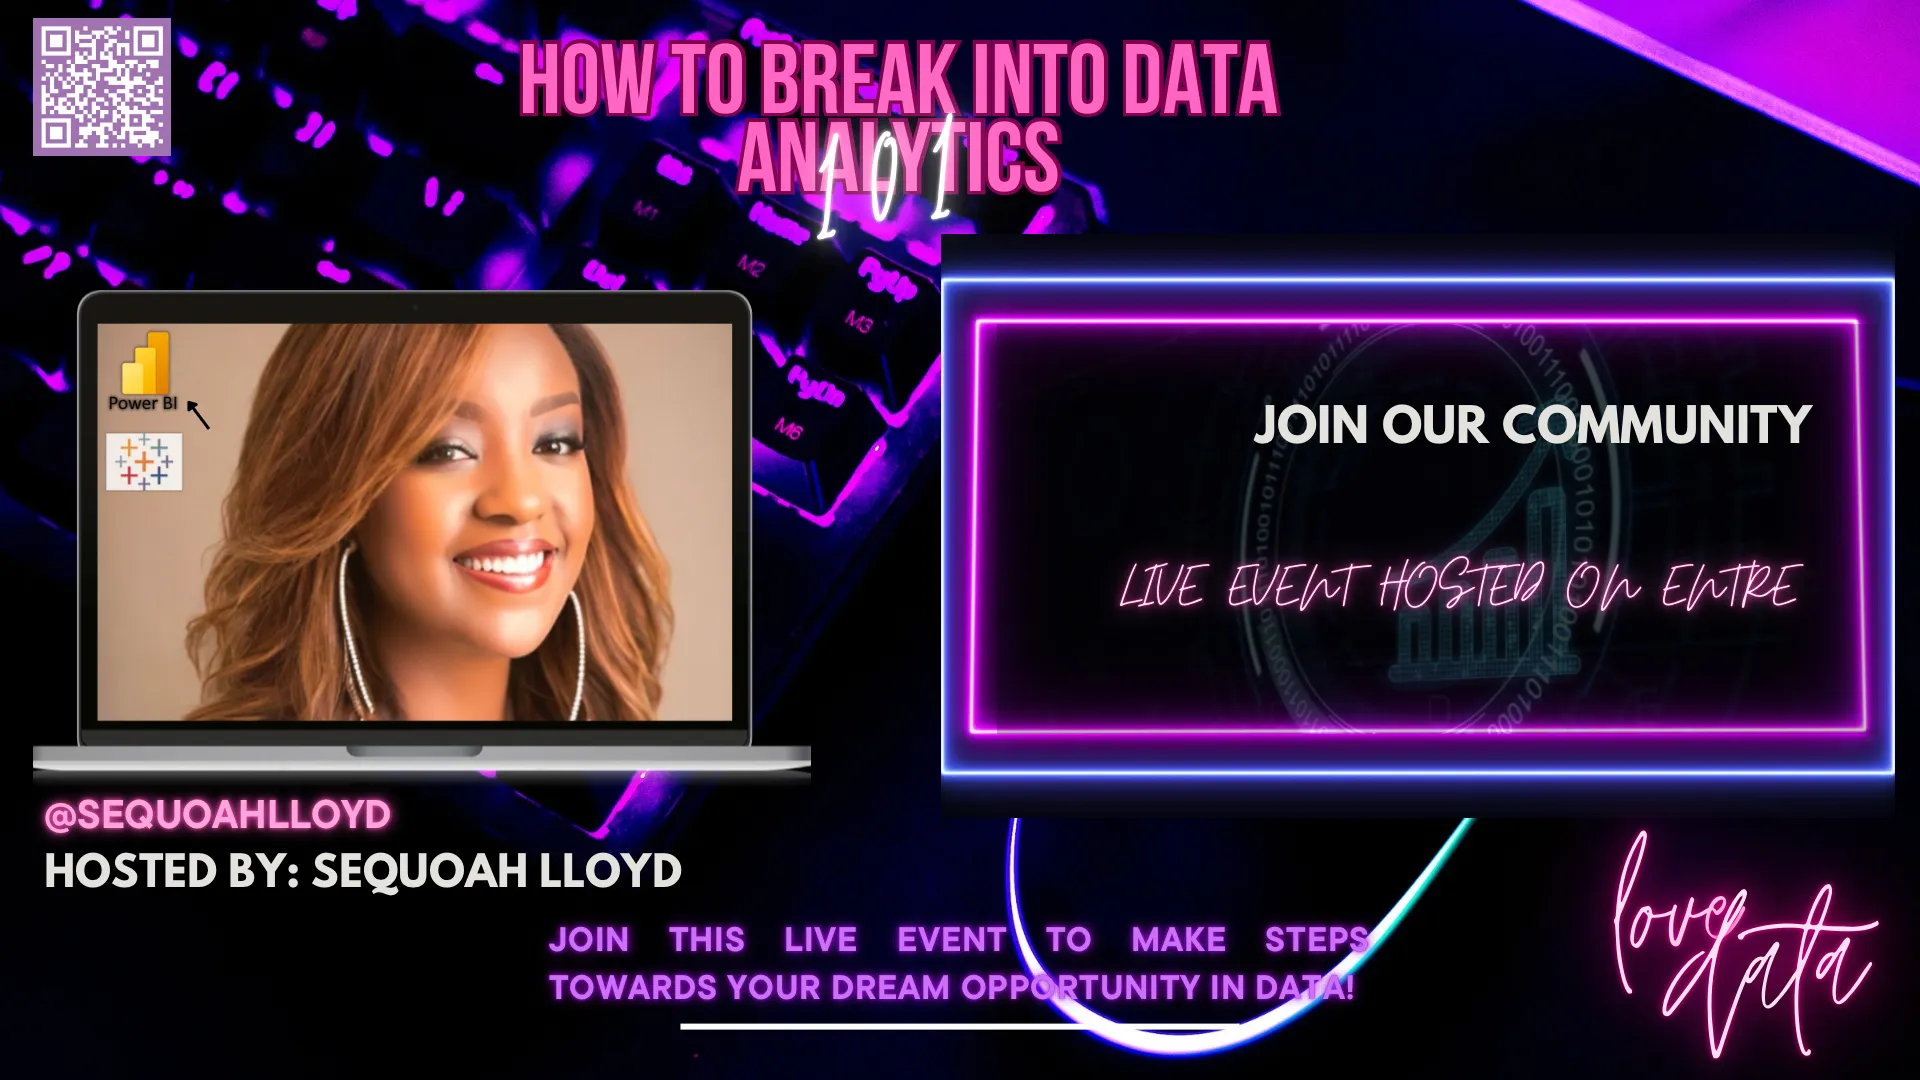 Welcome to our community! My name is Sequoah Lloyd. I am a data analytics professional and entrepreneur with over 9+ years of experience in the data world. I am also the Founder of SL Data Enterprises, LLC. I specialize in business intelligence, AI/ML, and data science.

Those who are interested in breaking into the data analytics world and want to connect with industry leaders, follow our group today!

We will be going live as well! Follow us today!

LinkedIn: https://www.linkedin.com/in/SequoahLloyd